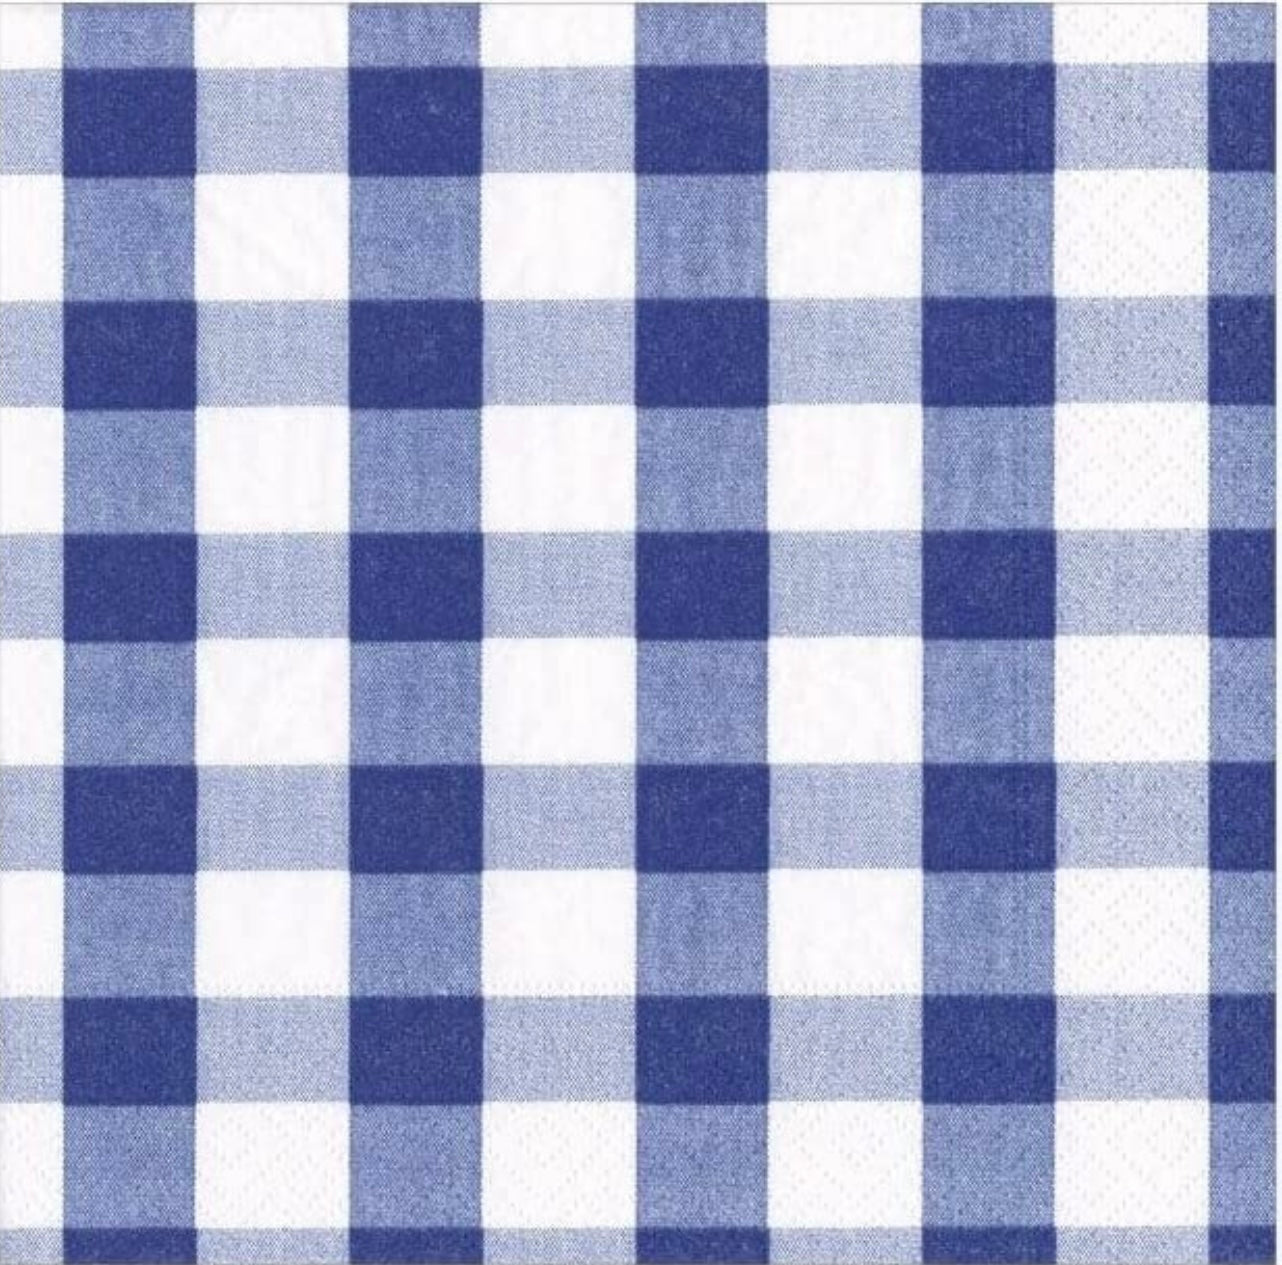 Paper Napkins - Navy Gingham - Luncheon Size 20 Pack